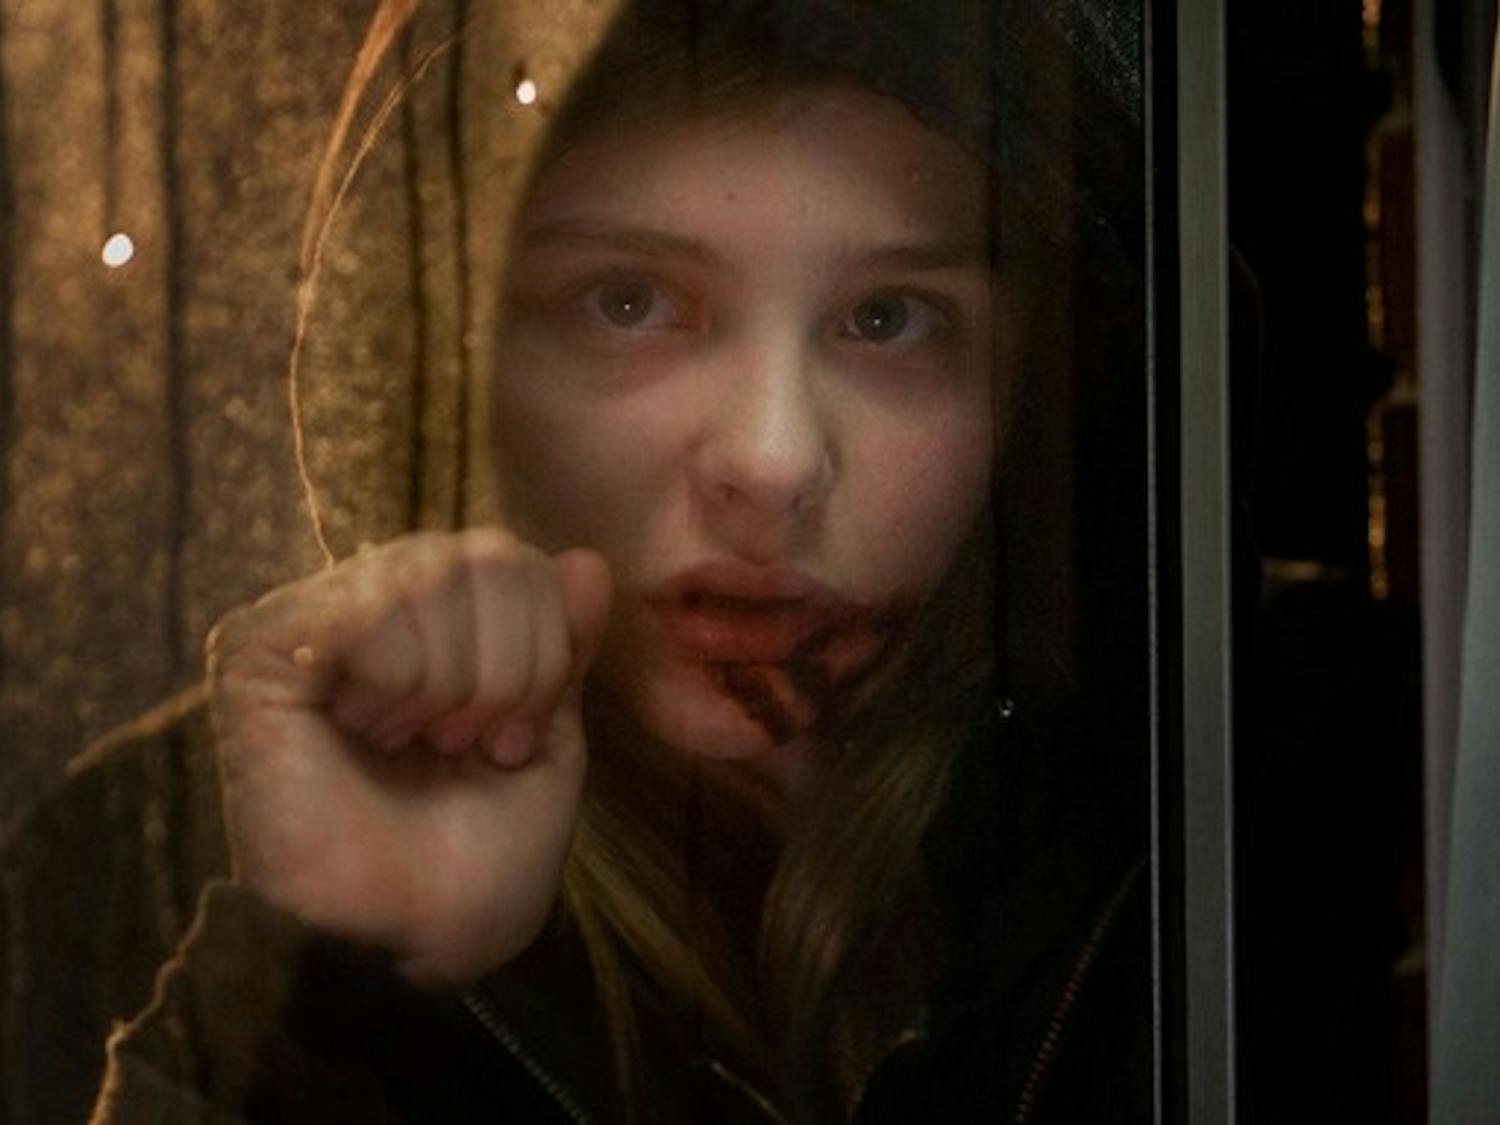 Actress Chloe Moretz plays Abby, a strange girl with a sinister secret.